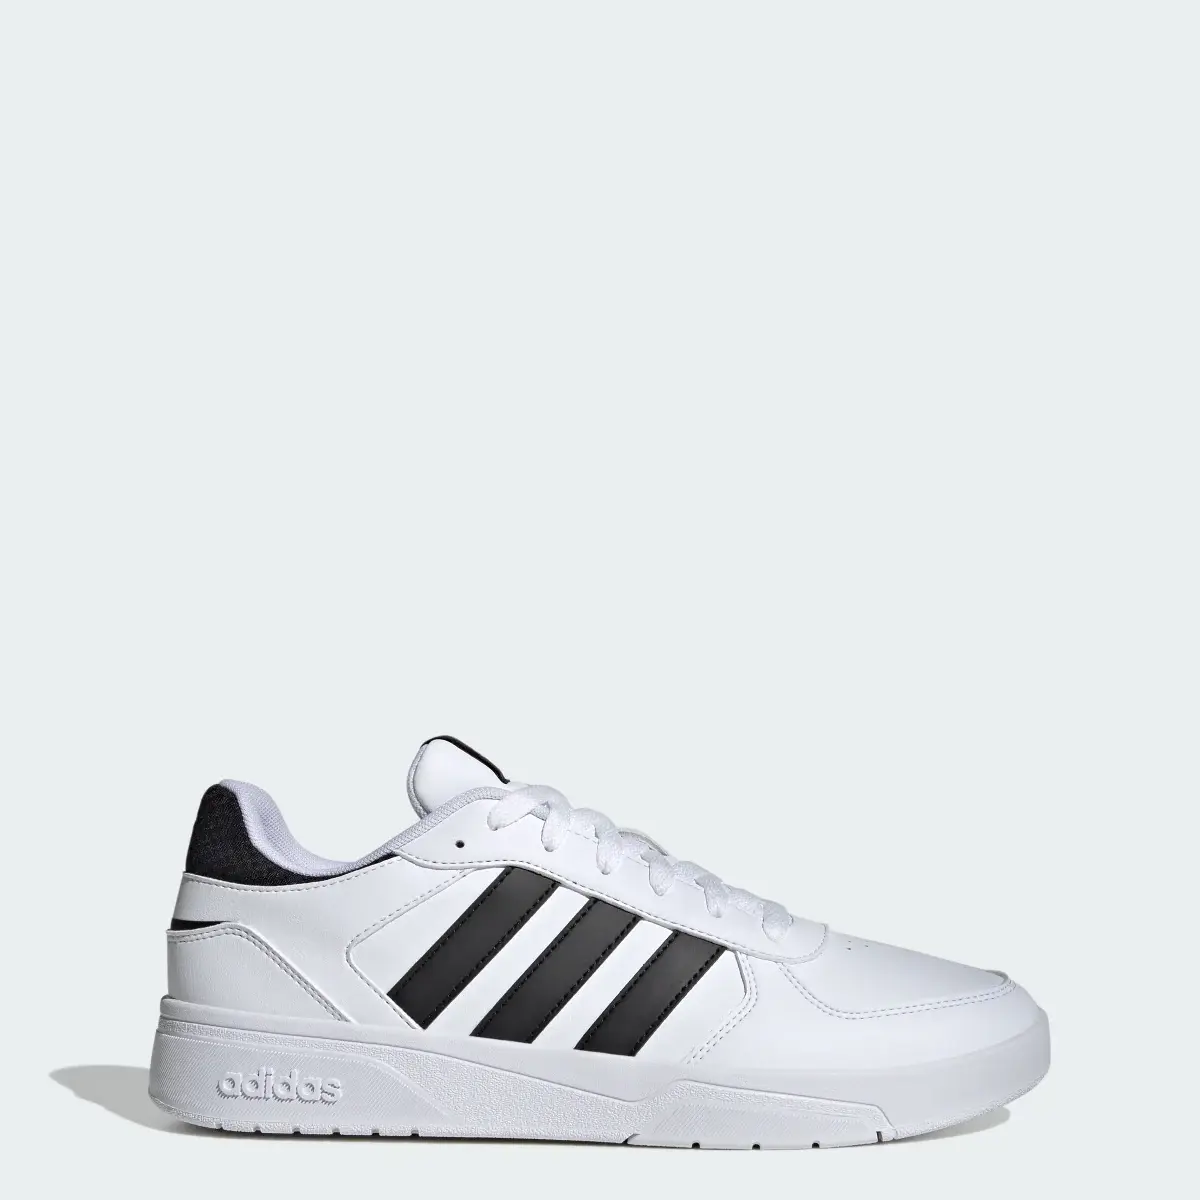 Adidas Chaussure CourtBeat Court Lifestyle. 1